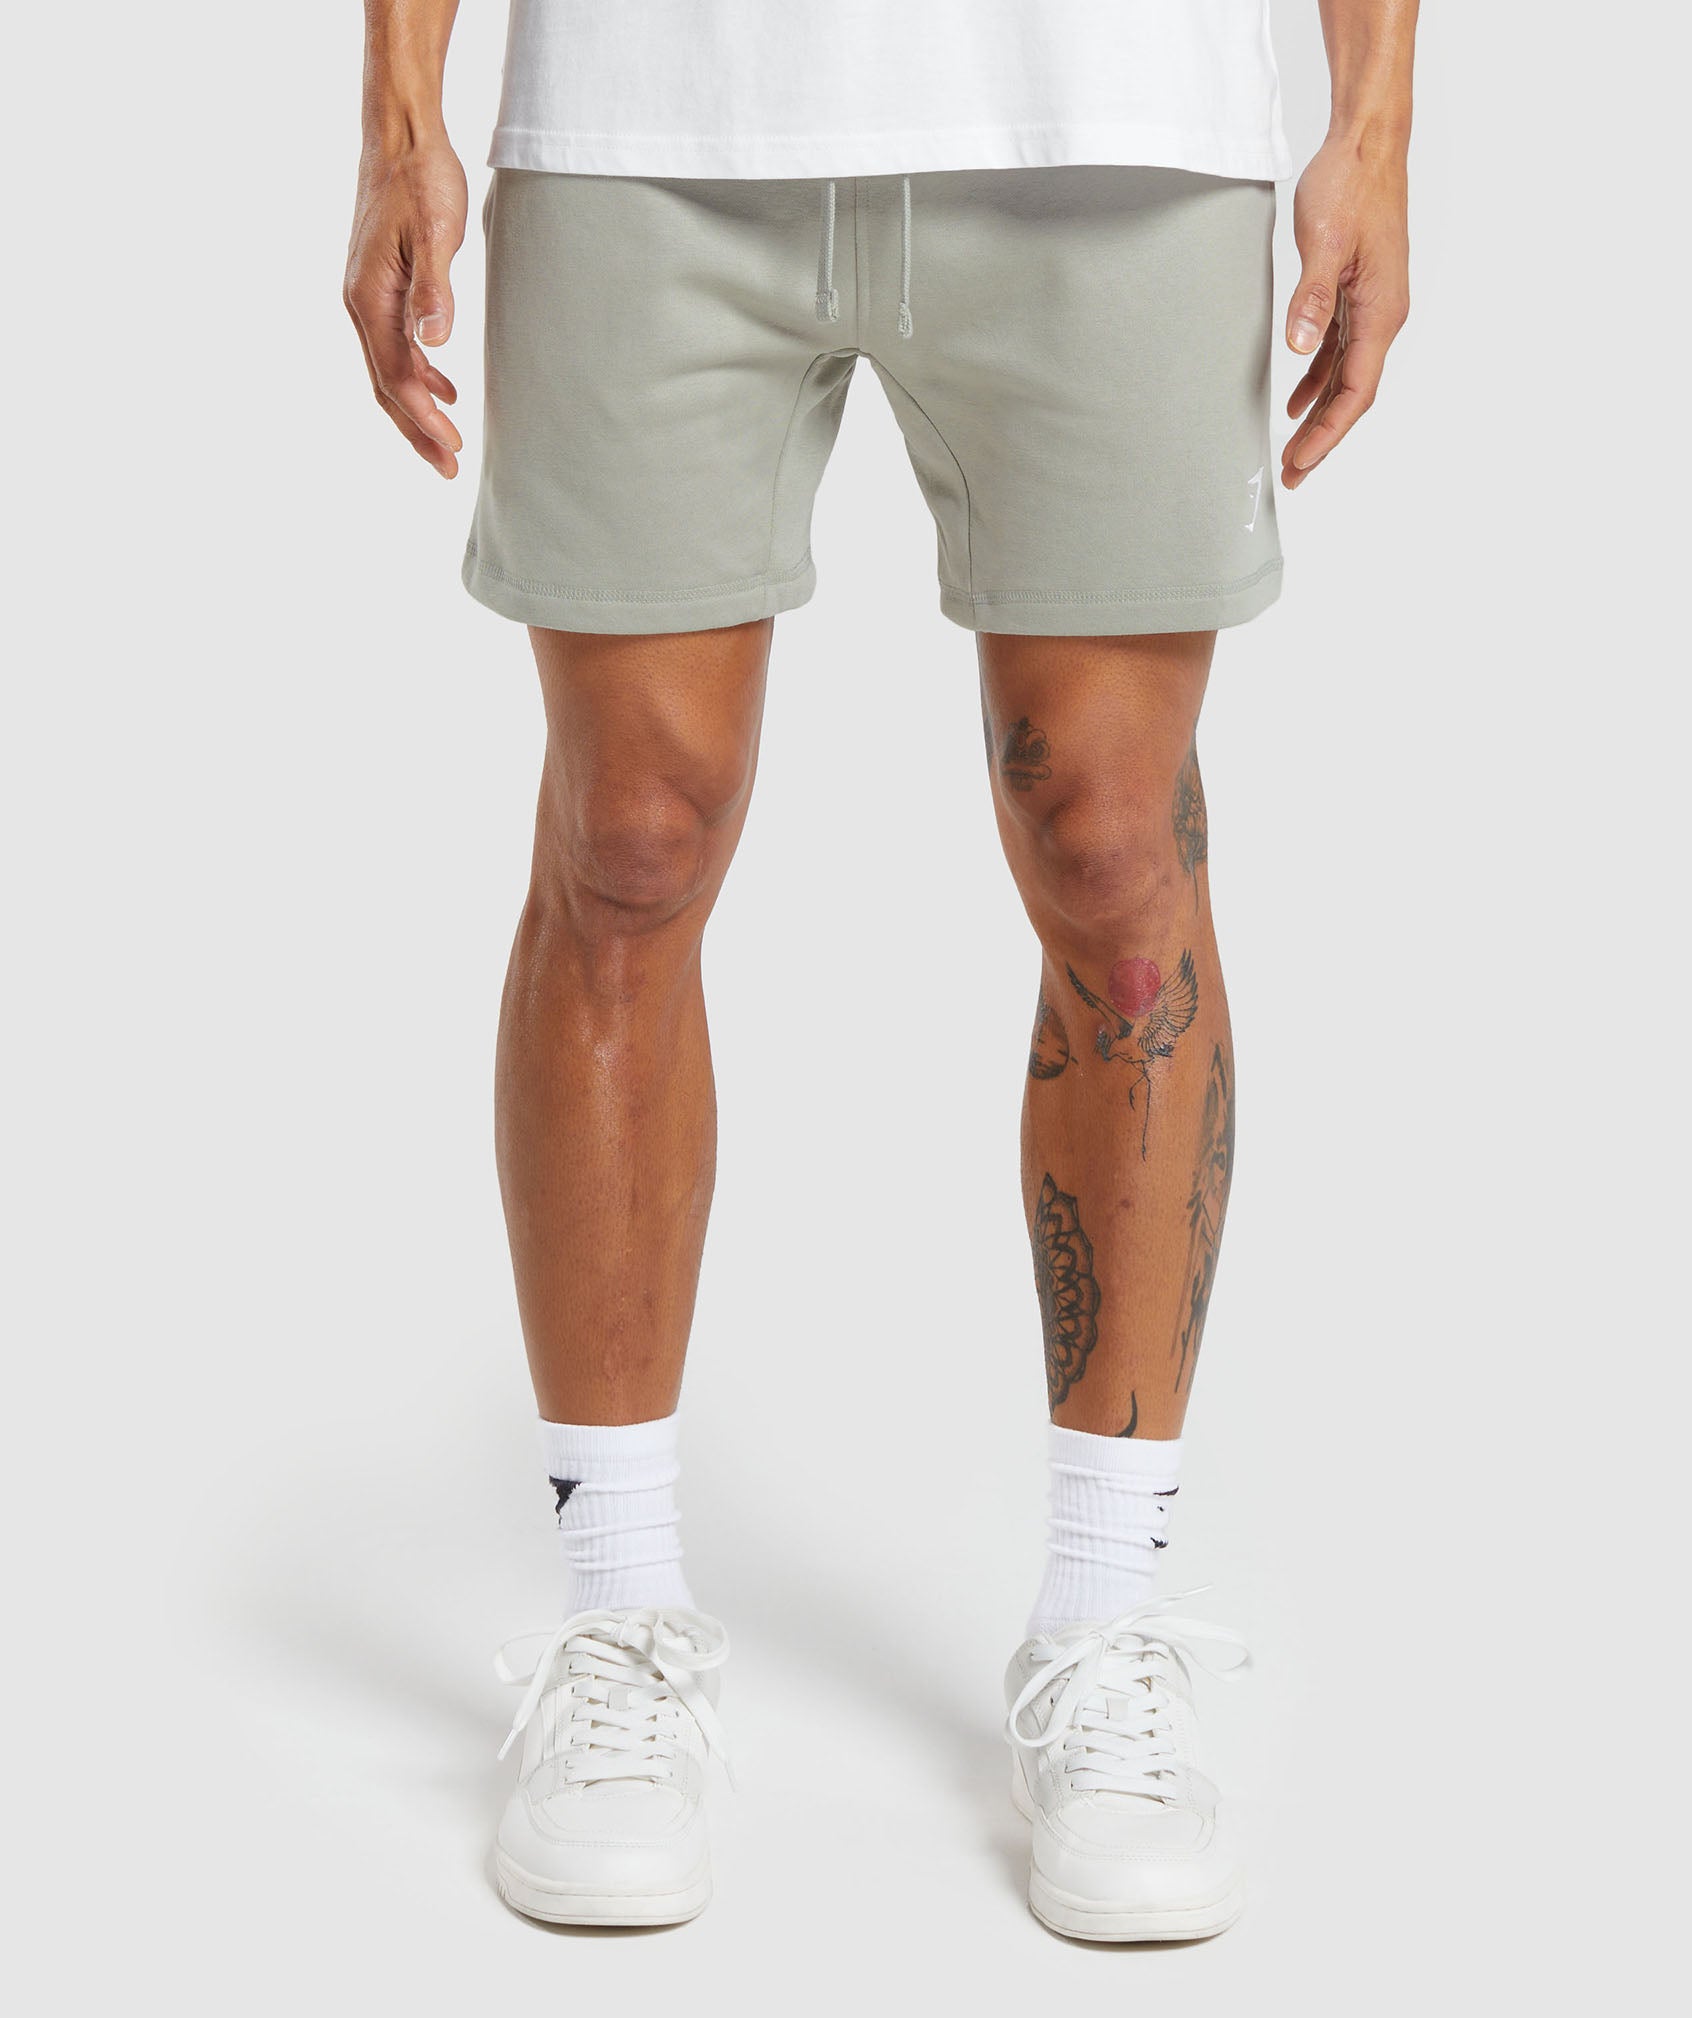 Crest 7" Shorts in Stone Grey